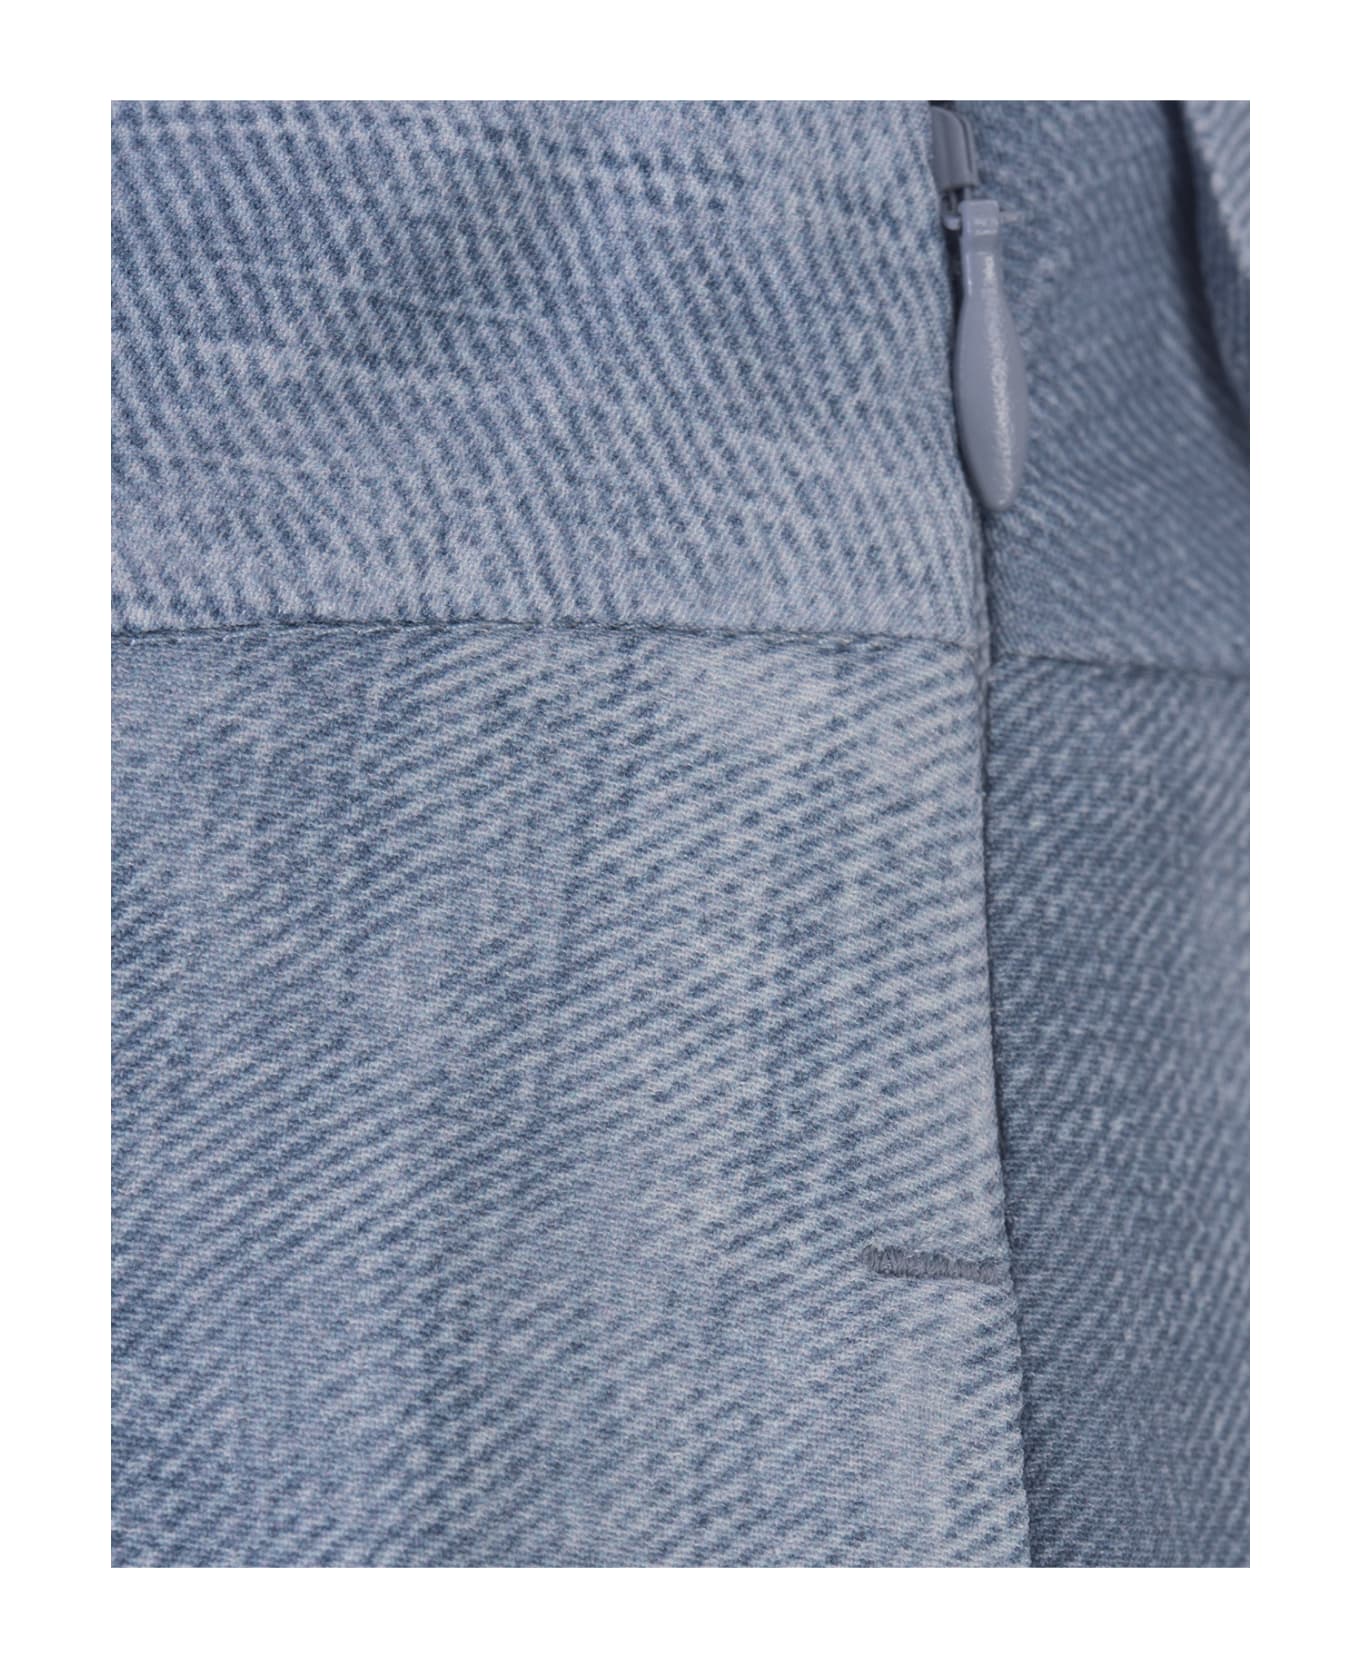 Ermanno Scervino Marocain Palace Trousers - Blue